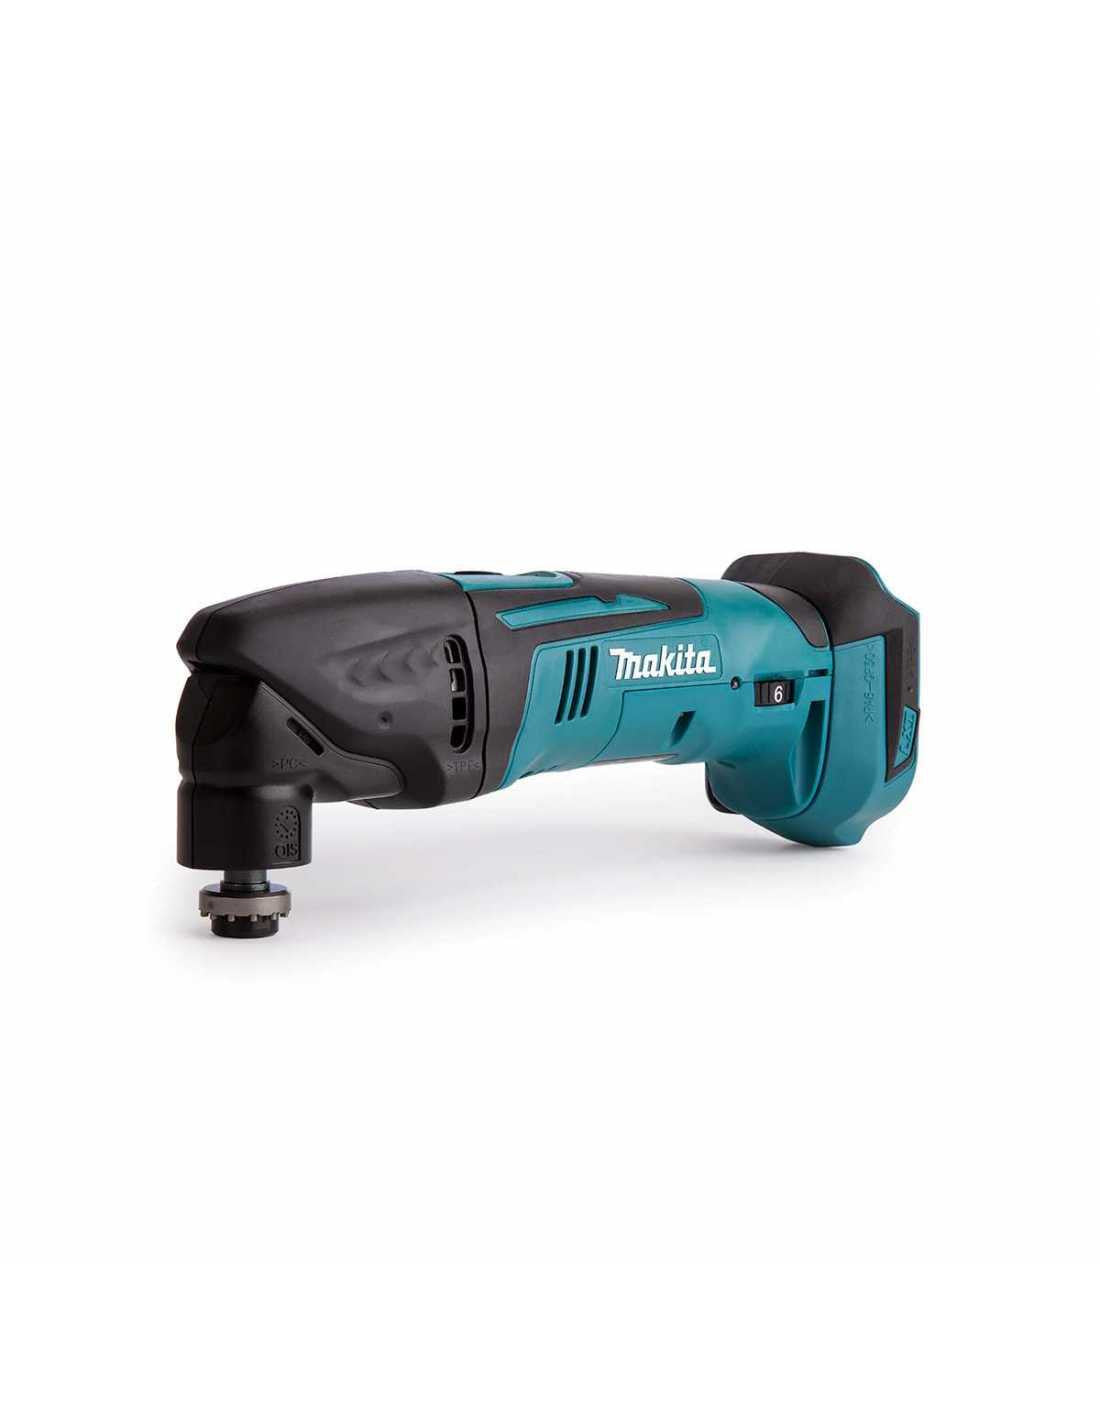 Makita kit with 10 tools + 3 3ah batteries + charger + 2 bags DLX1080BL3